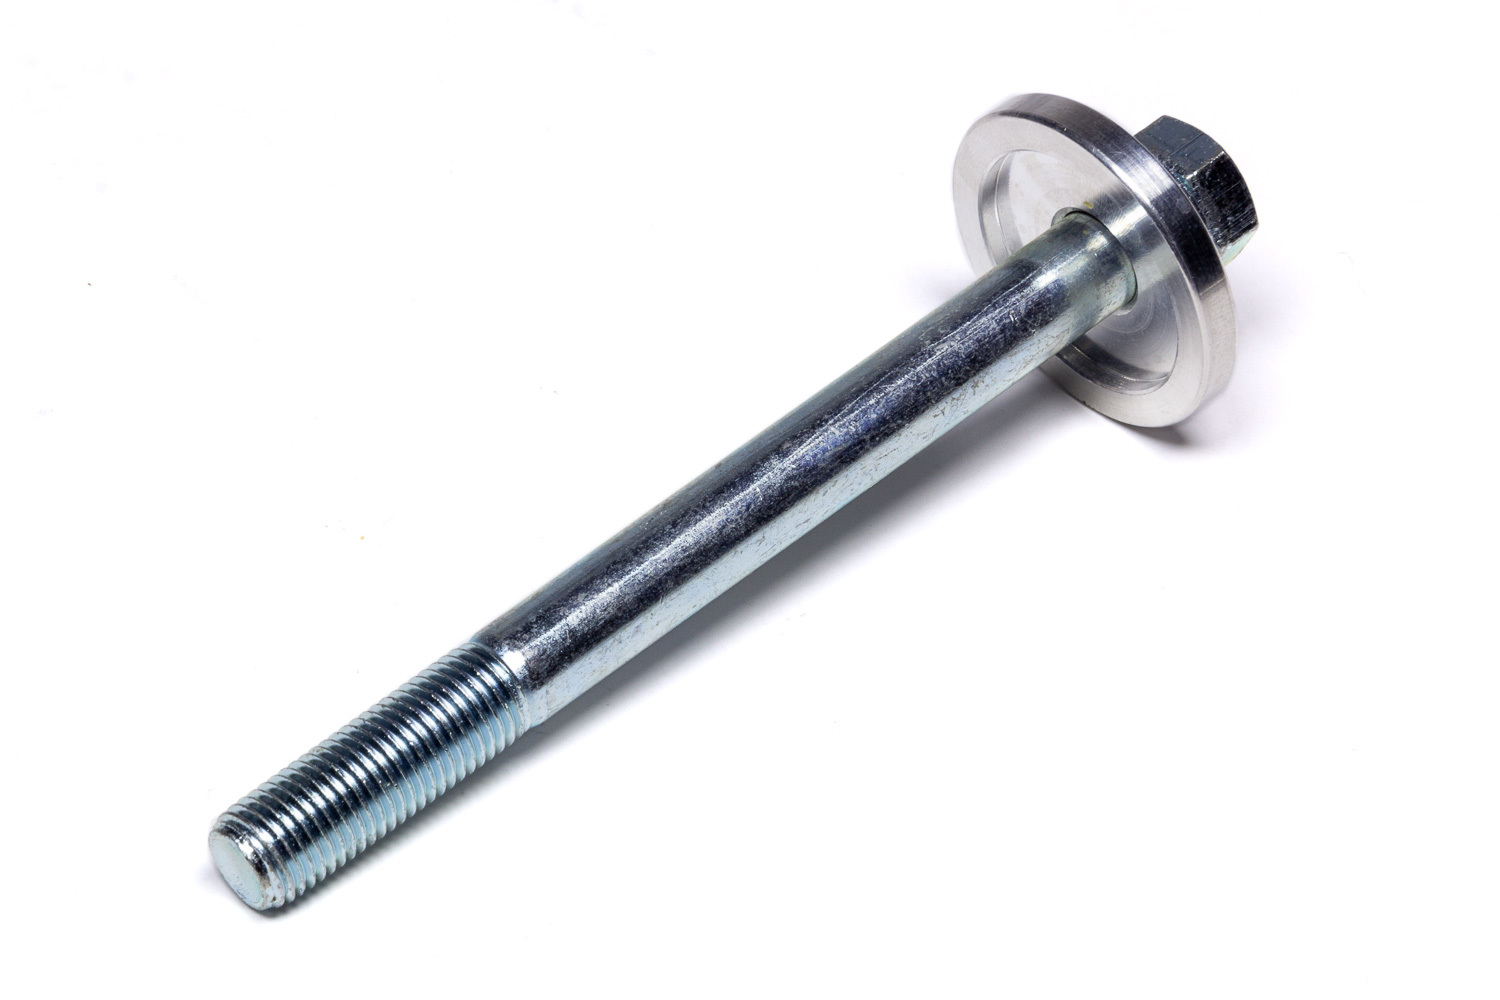 Jones Racing Products BEC-2109-C Mandrel Drive Bolt, 7/16 in Bolt, 5.000 in Long, Hex Head, Step Washer, Steel, Each